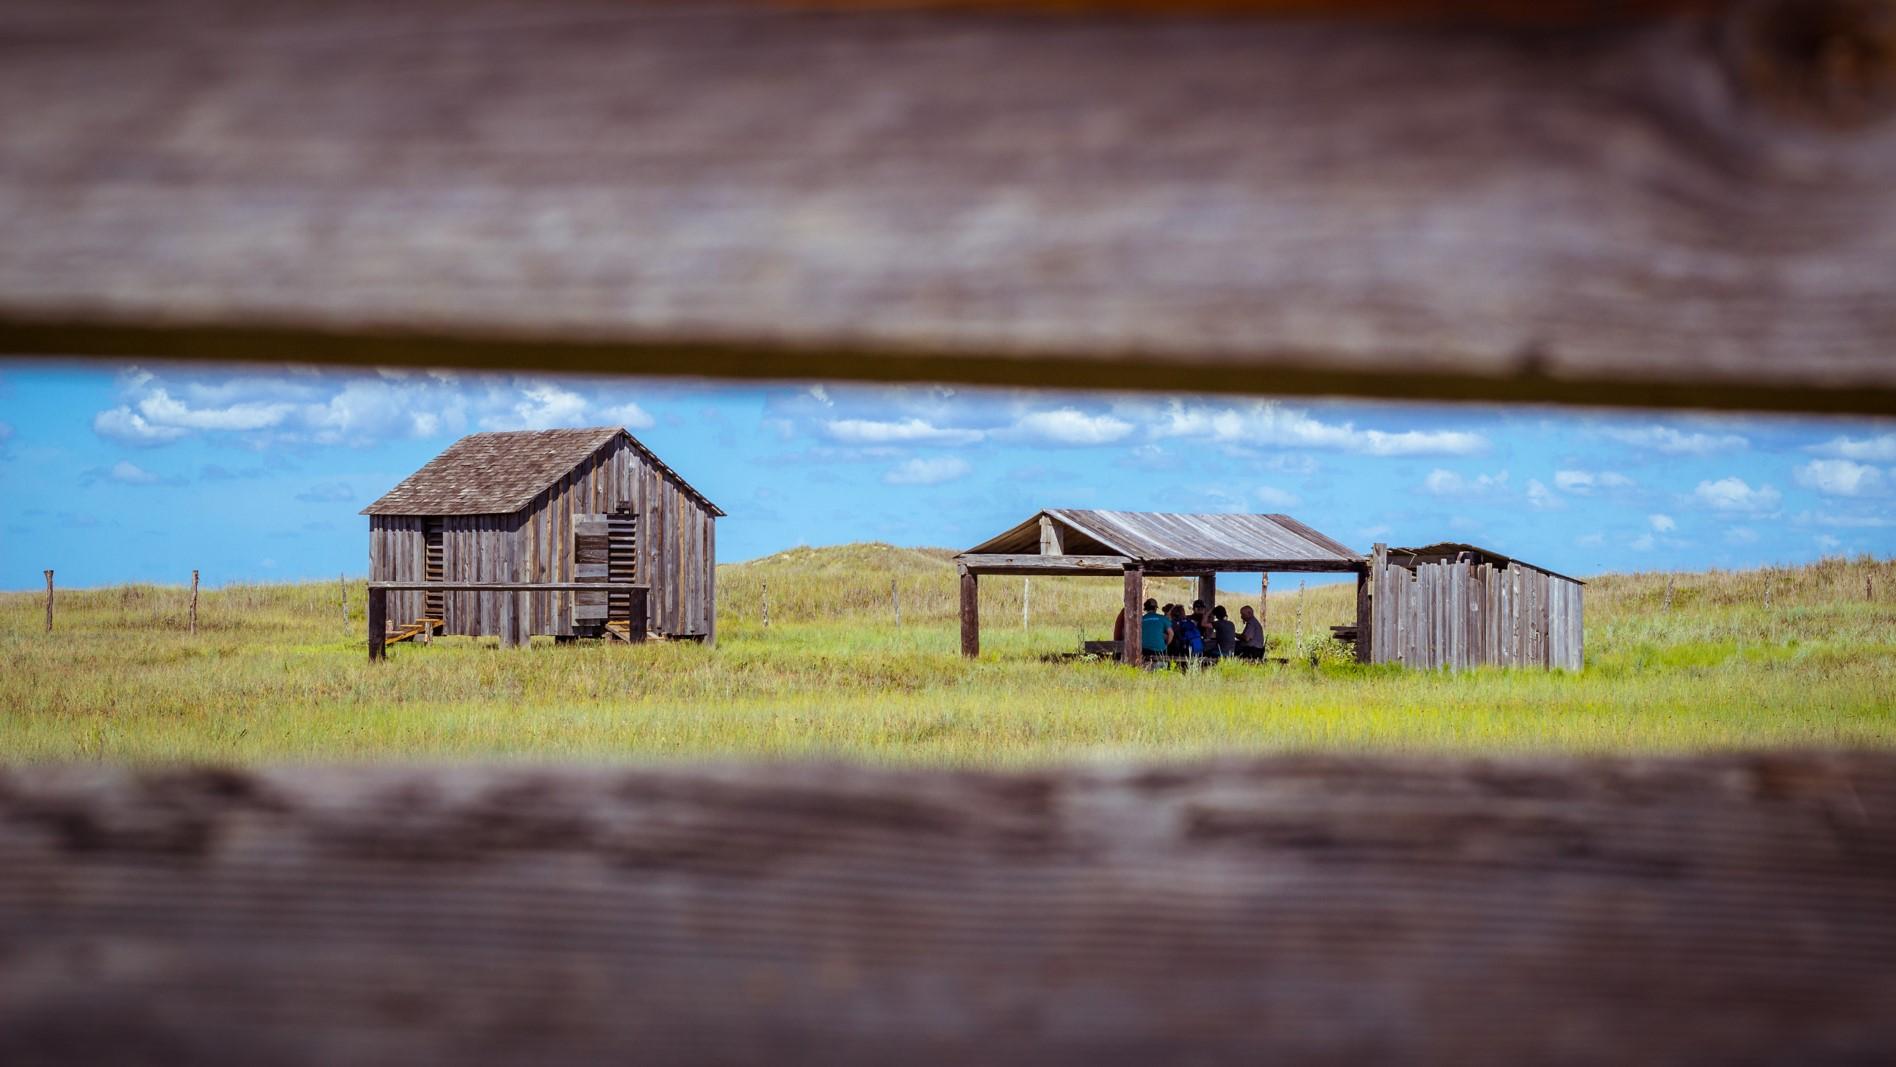 Small wooden structures are seen looking through a wood fence.